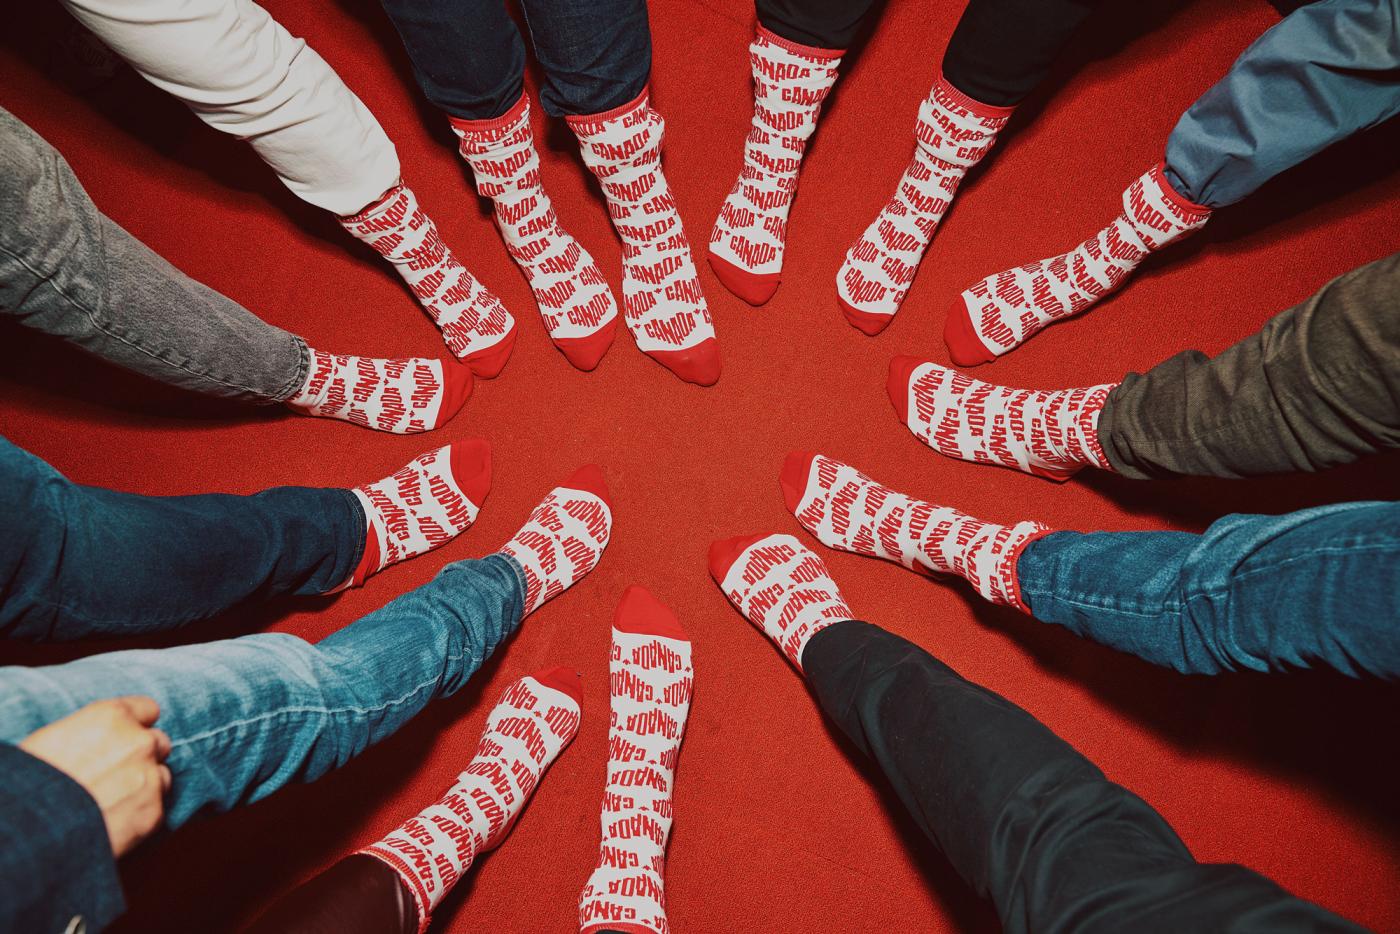 A group of people wearing red and white Canada branded socks are stepping together to make a circle.